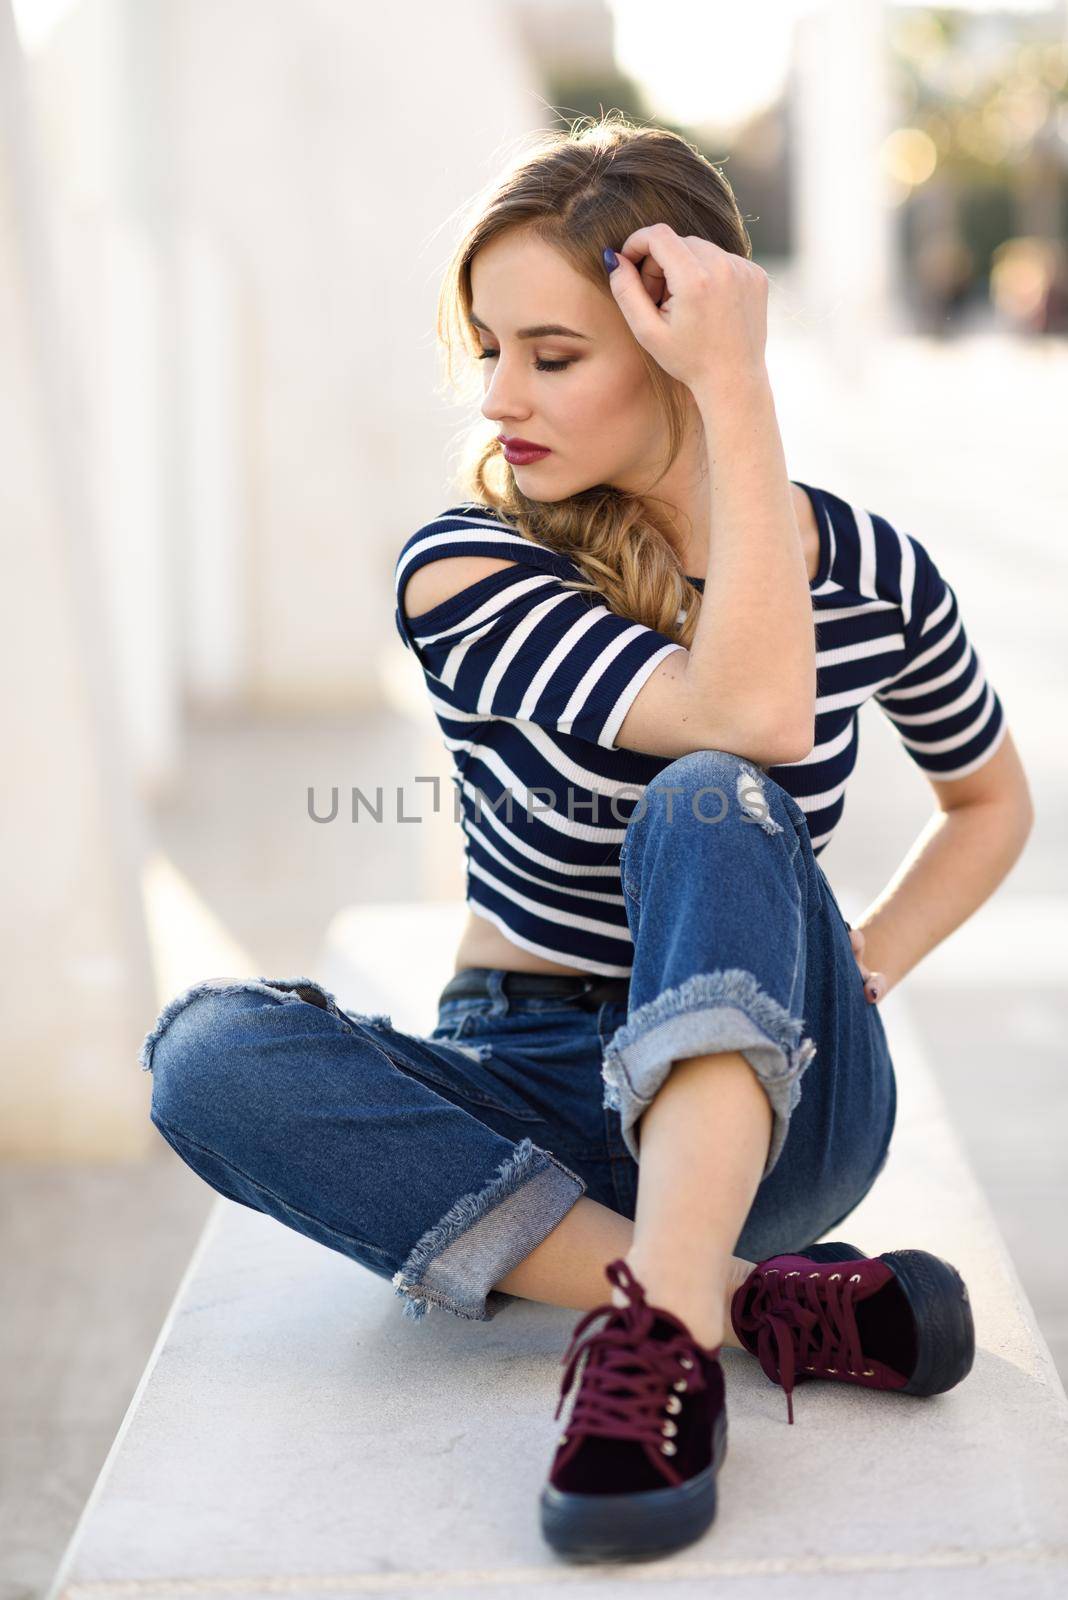 Blonde woman, model of fashion, sitting in urban background. by javiindy